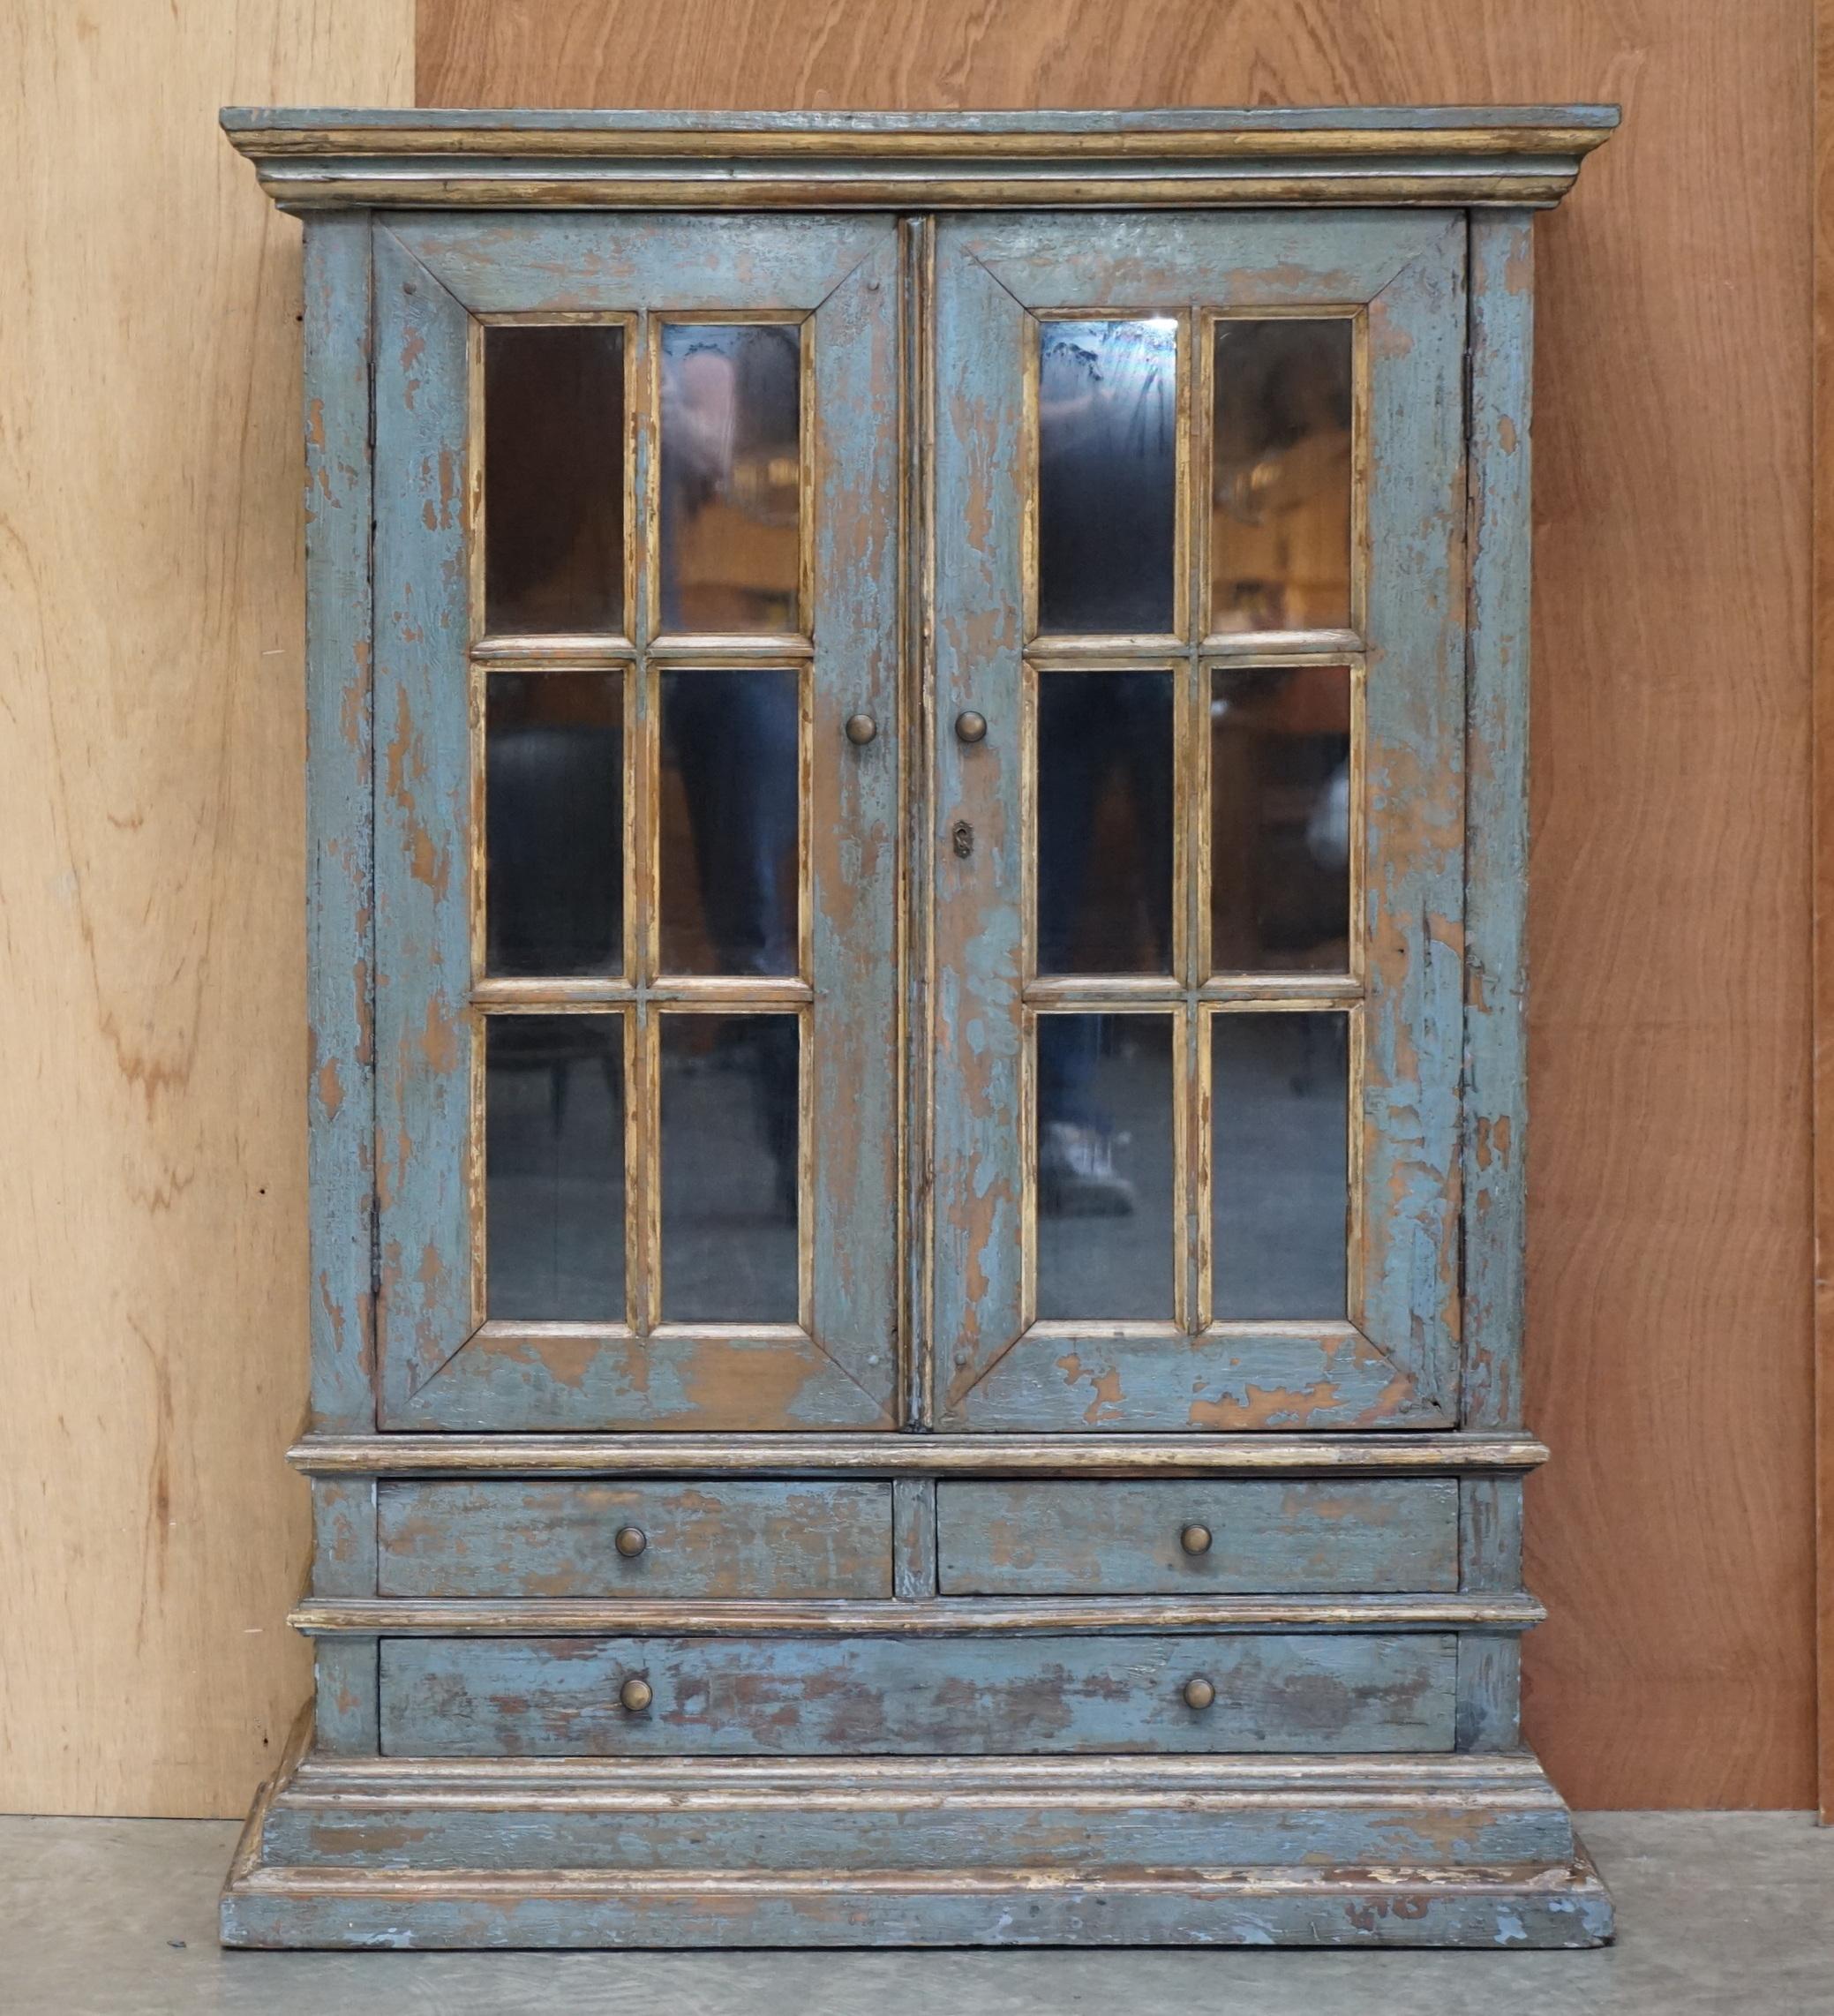 We are delighted to offer for sale this lovely antique English cottage house display cabinet or bookcase

A good looking and well made piece, its an interesting height, around 4’7 feet tall which is classed as cottage house furniture because they